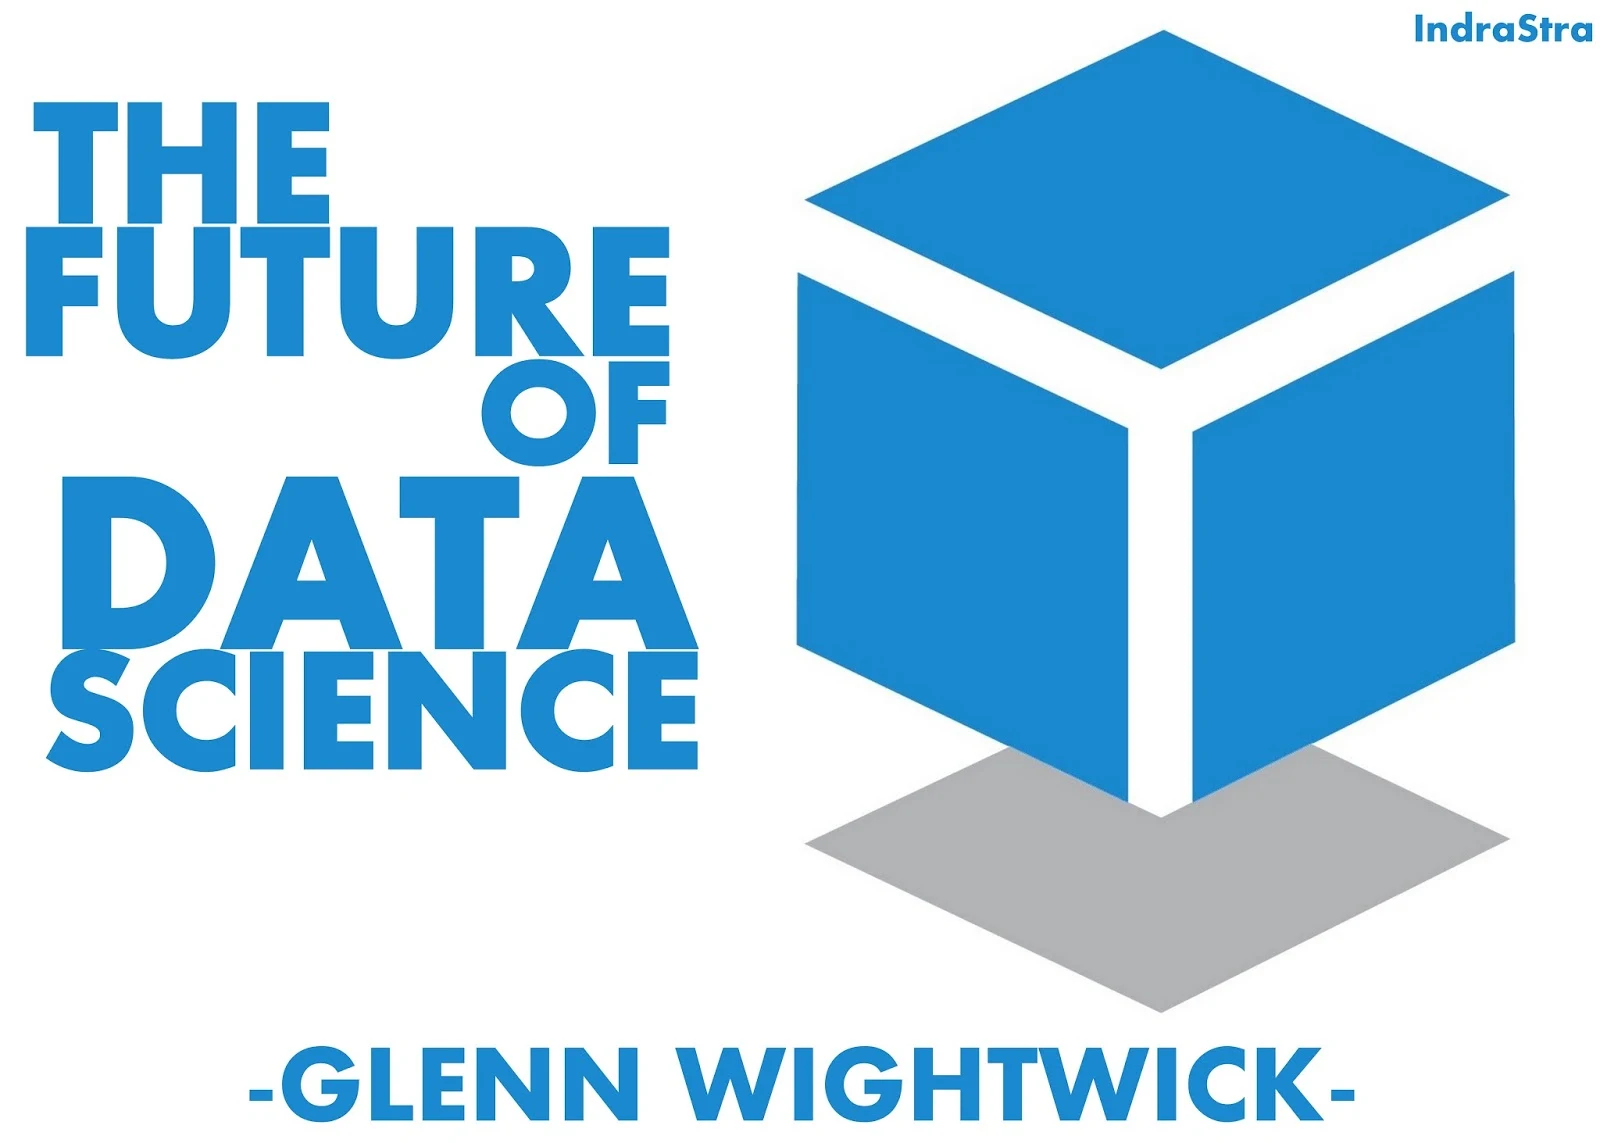 The Future of Data Science by Glenn Wightwick